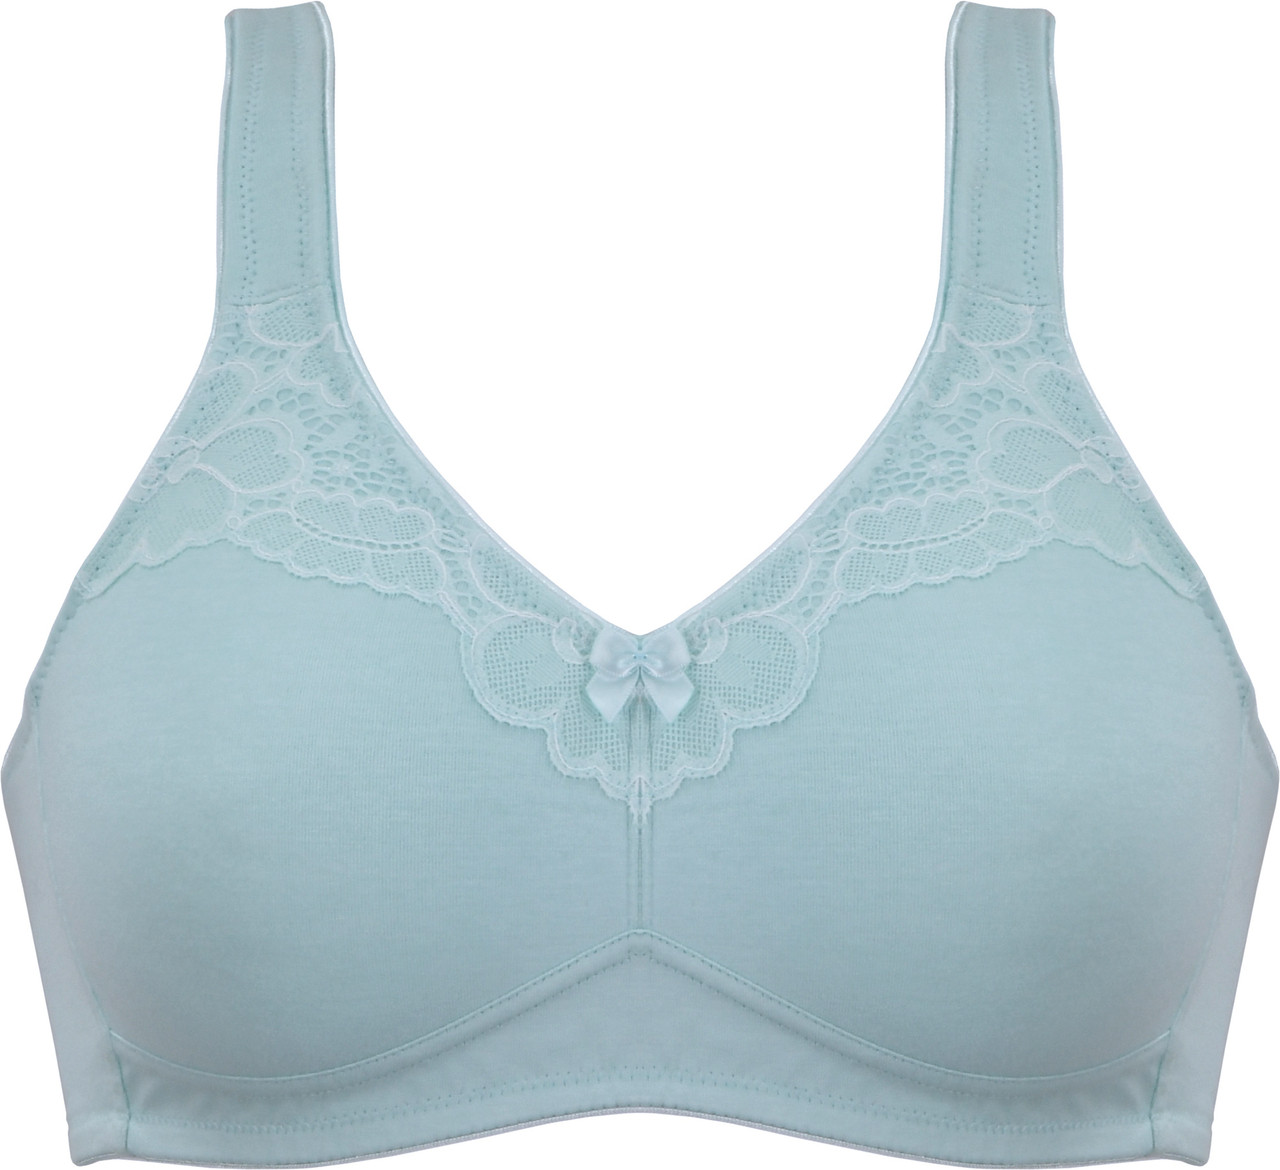 Wire-Free Moulded Soft Cup Cotton Bra by Naturana 5144